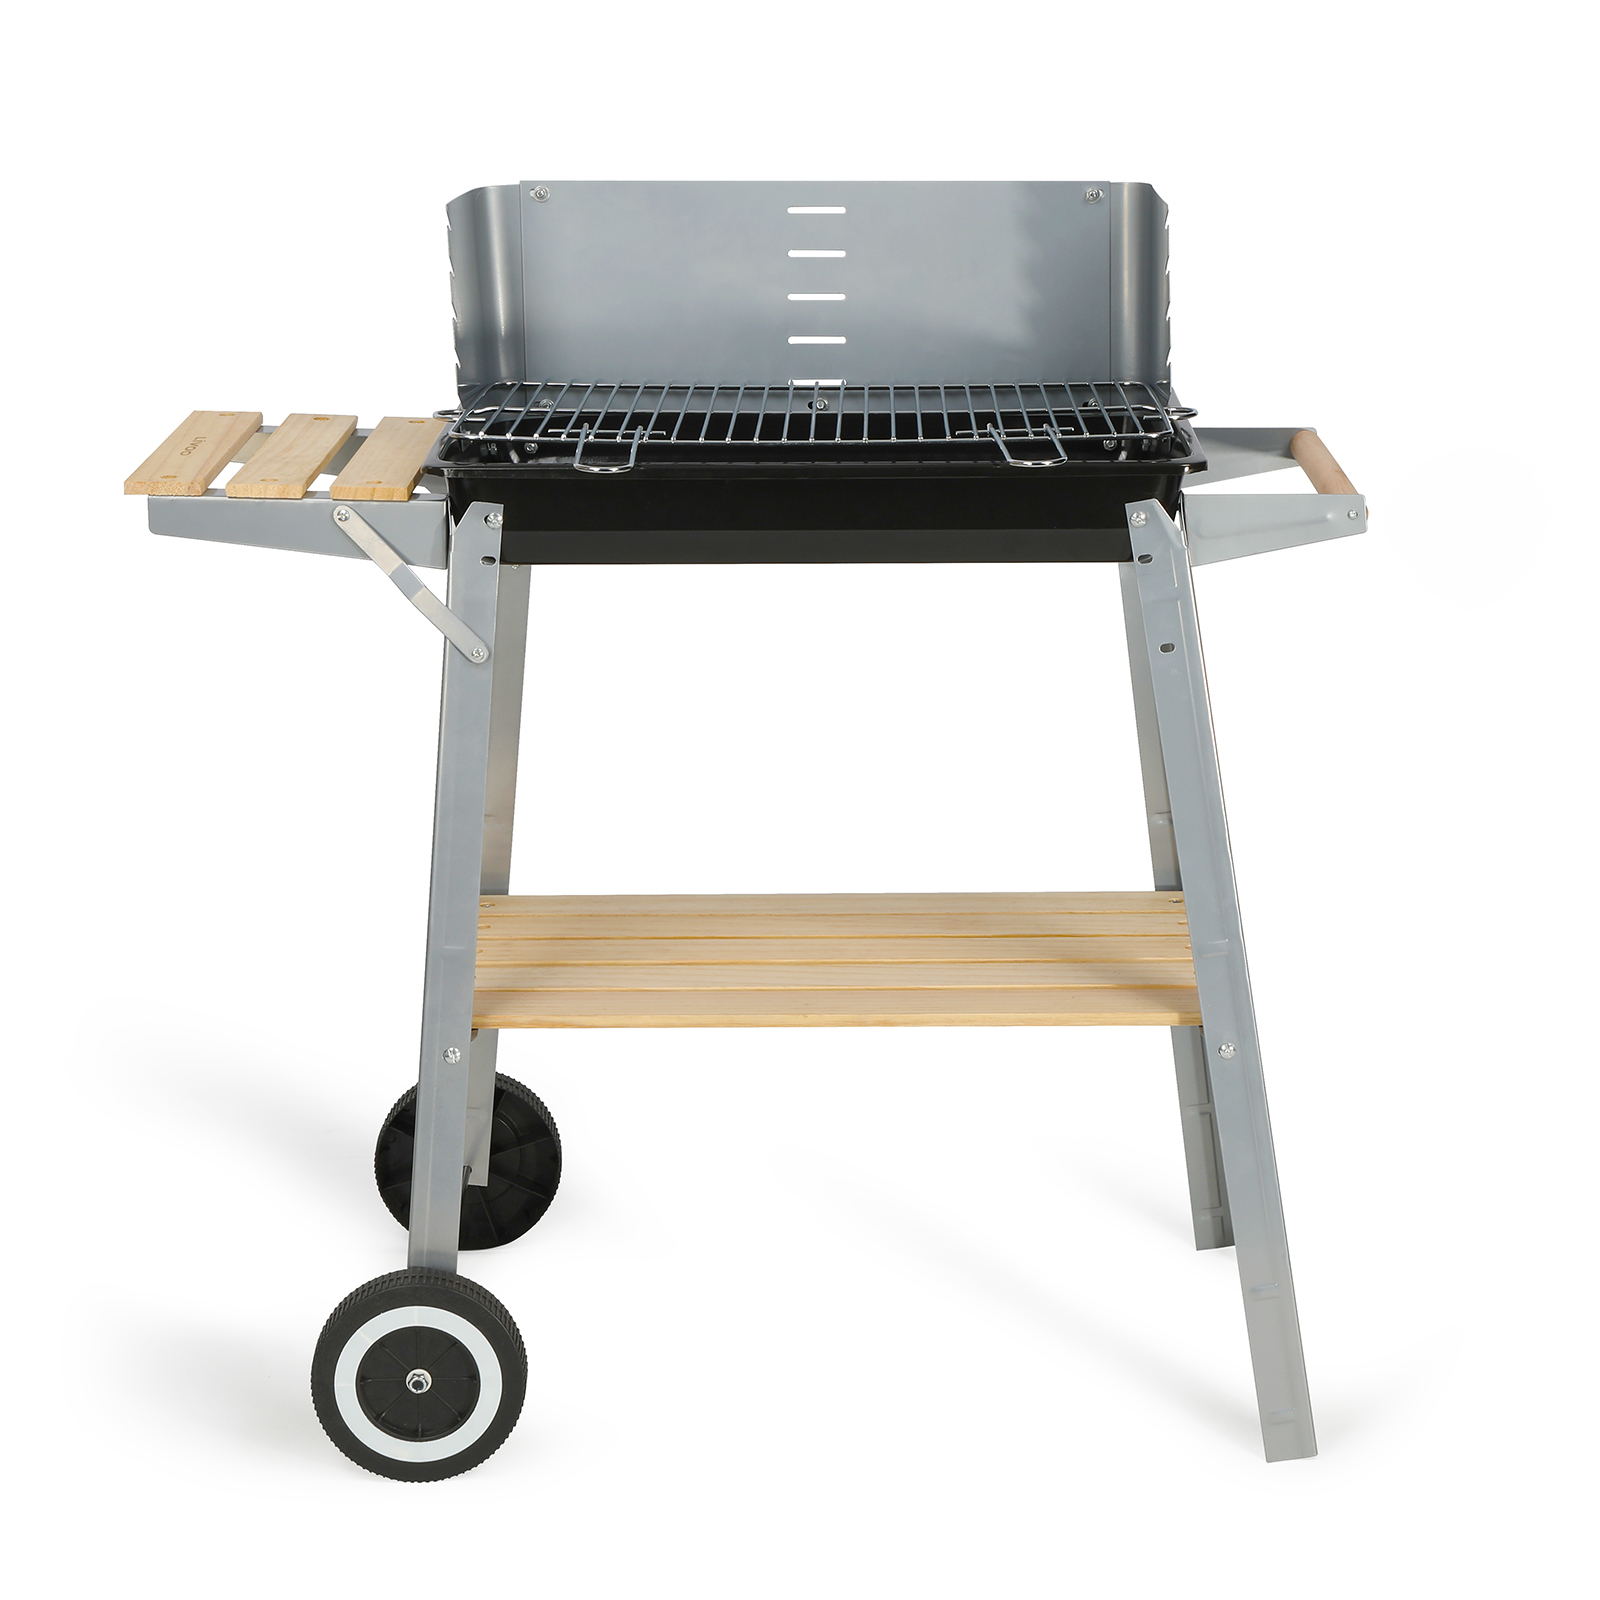 Gartengrill Holzkohle-Grill rund Standgrill Deckel Camping Party Outdoor 8056 